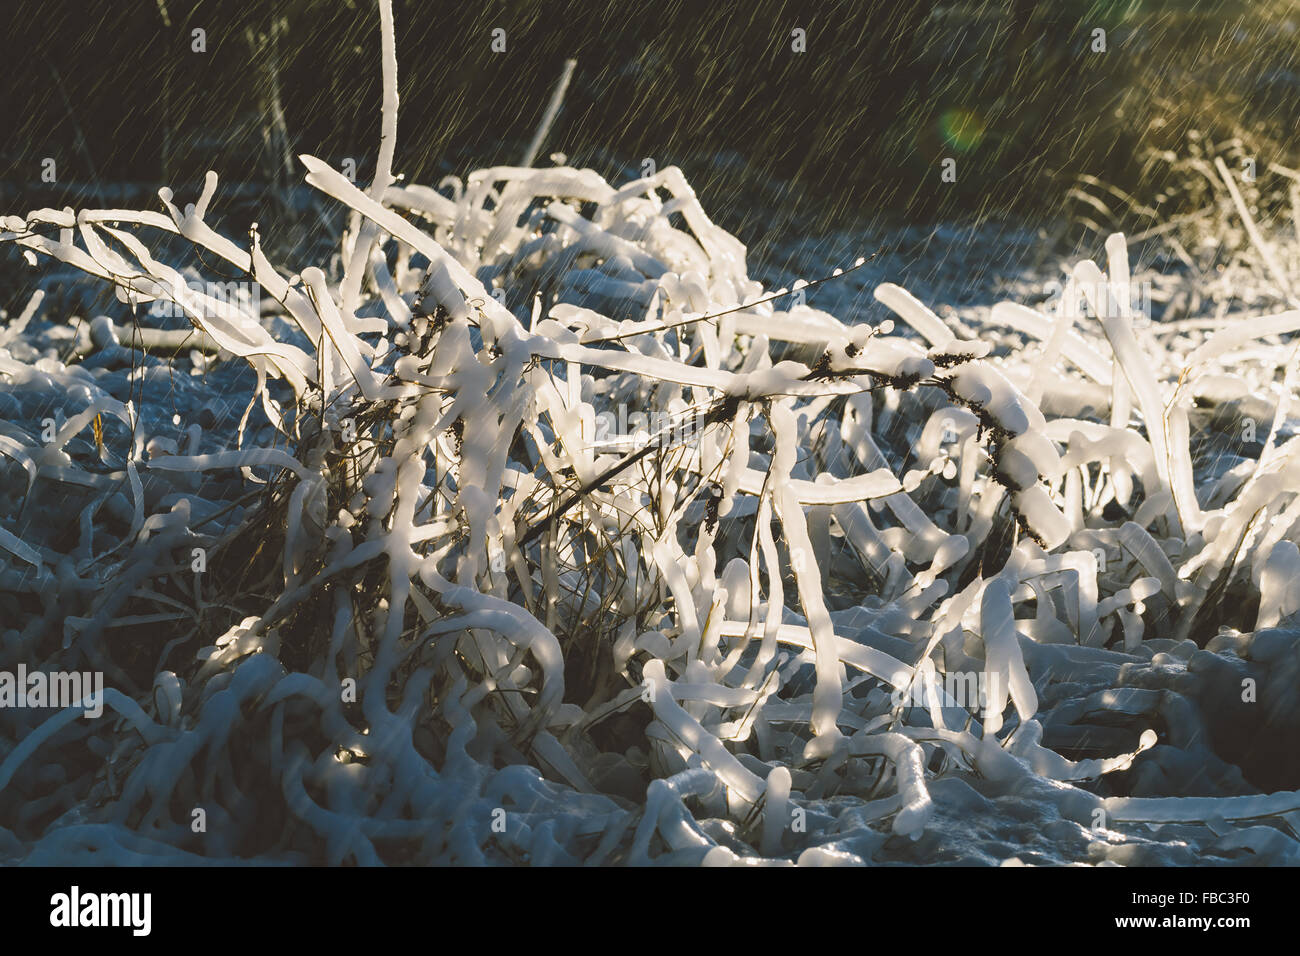 Iced over grass in an amazing form with water splashing. Stock Photo